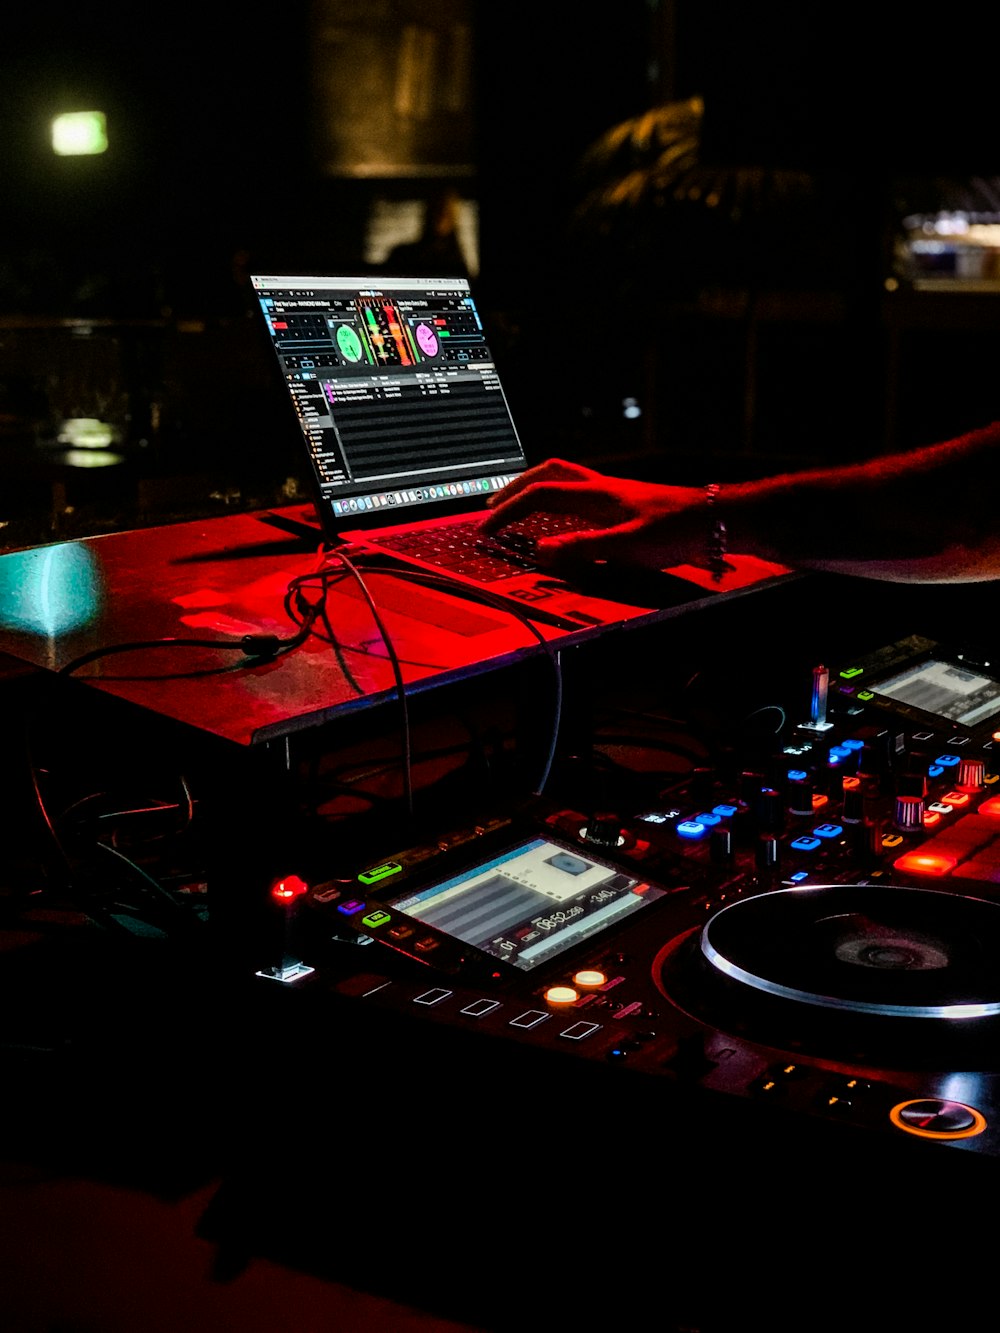 a dj mixing music in front of a laptop